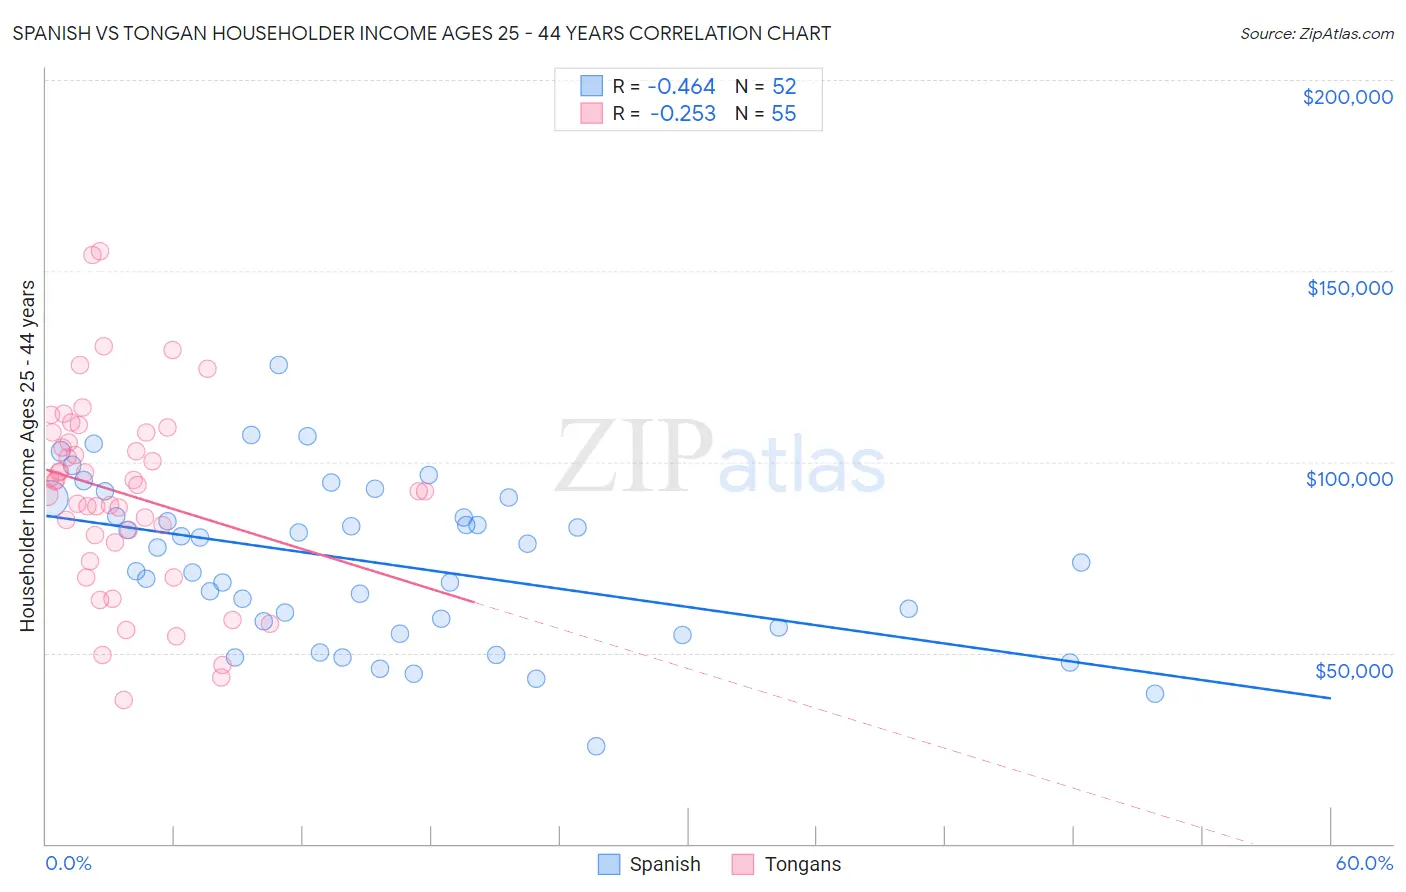 Spanish vs Tongan Householder Income Ages 25 - 44 years